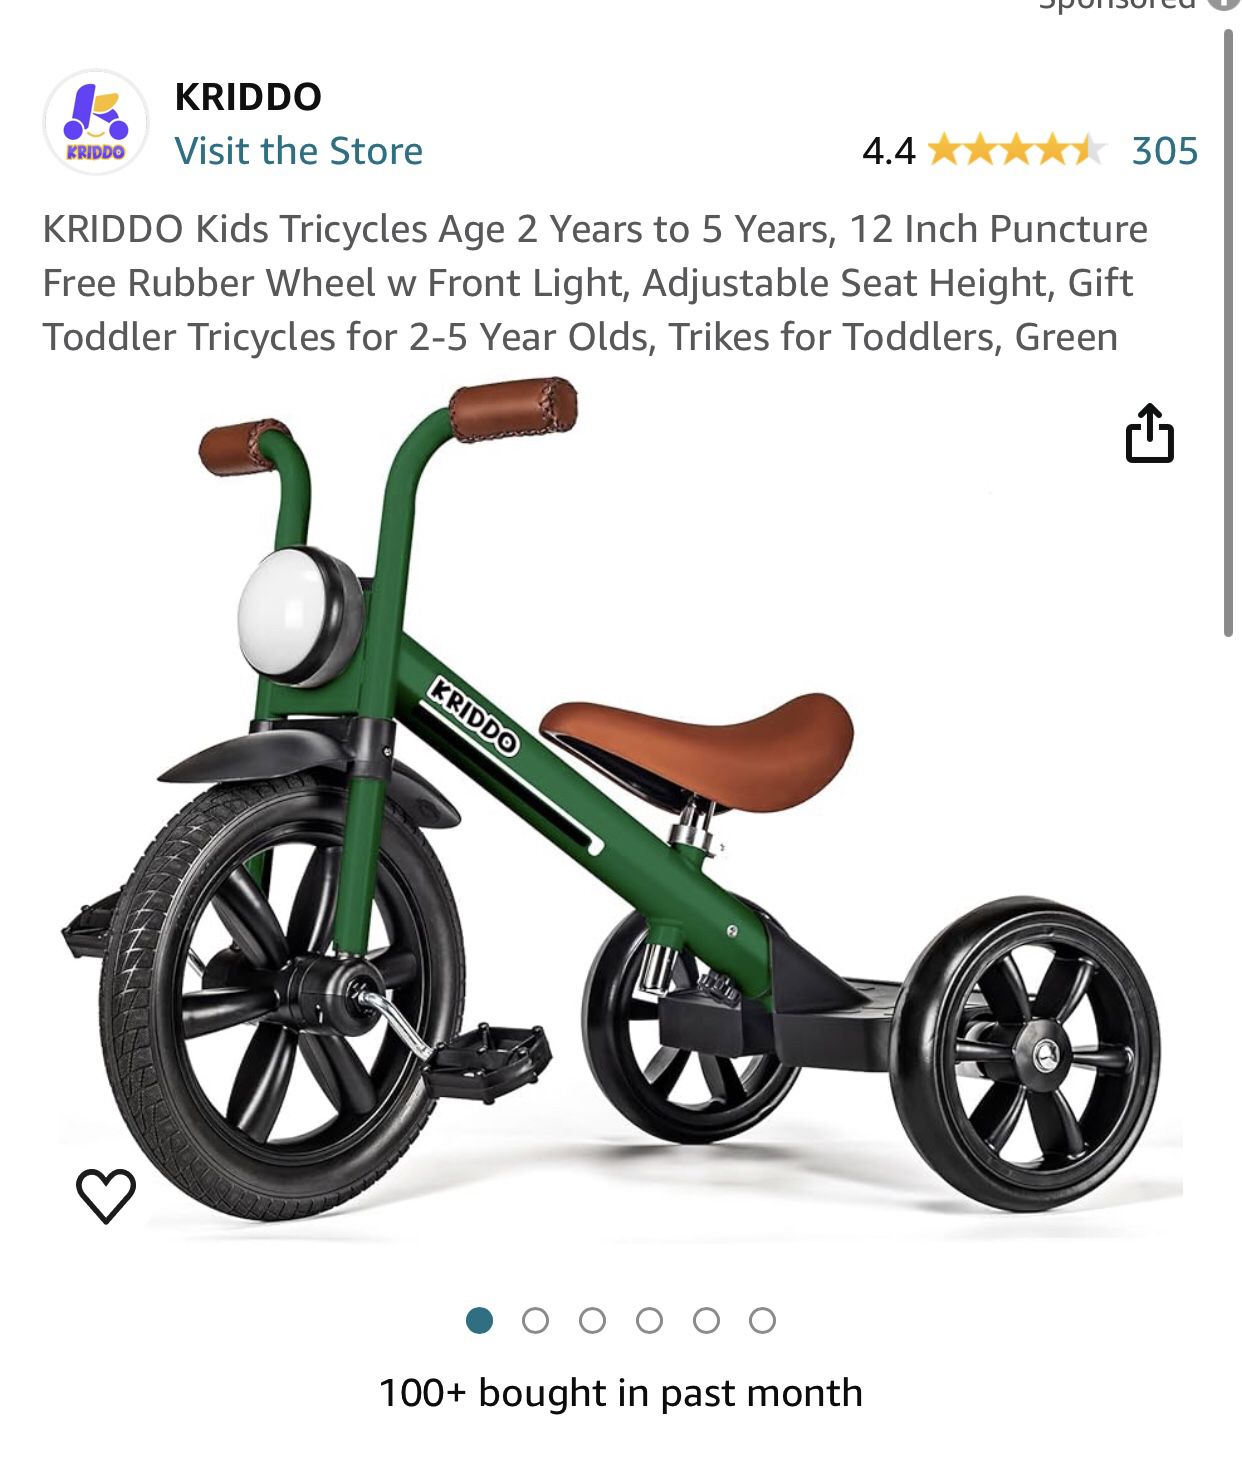 KRIDDO Kids Tricycles Age 2 Years to 5 Years